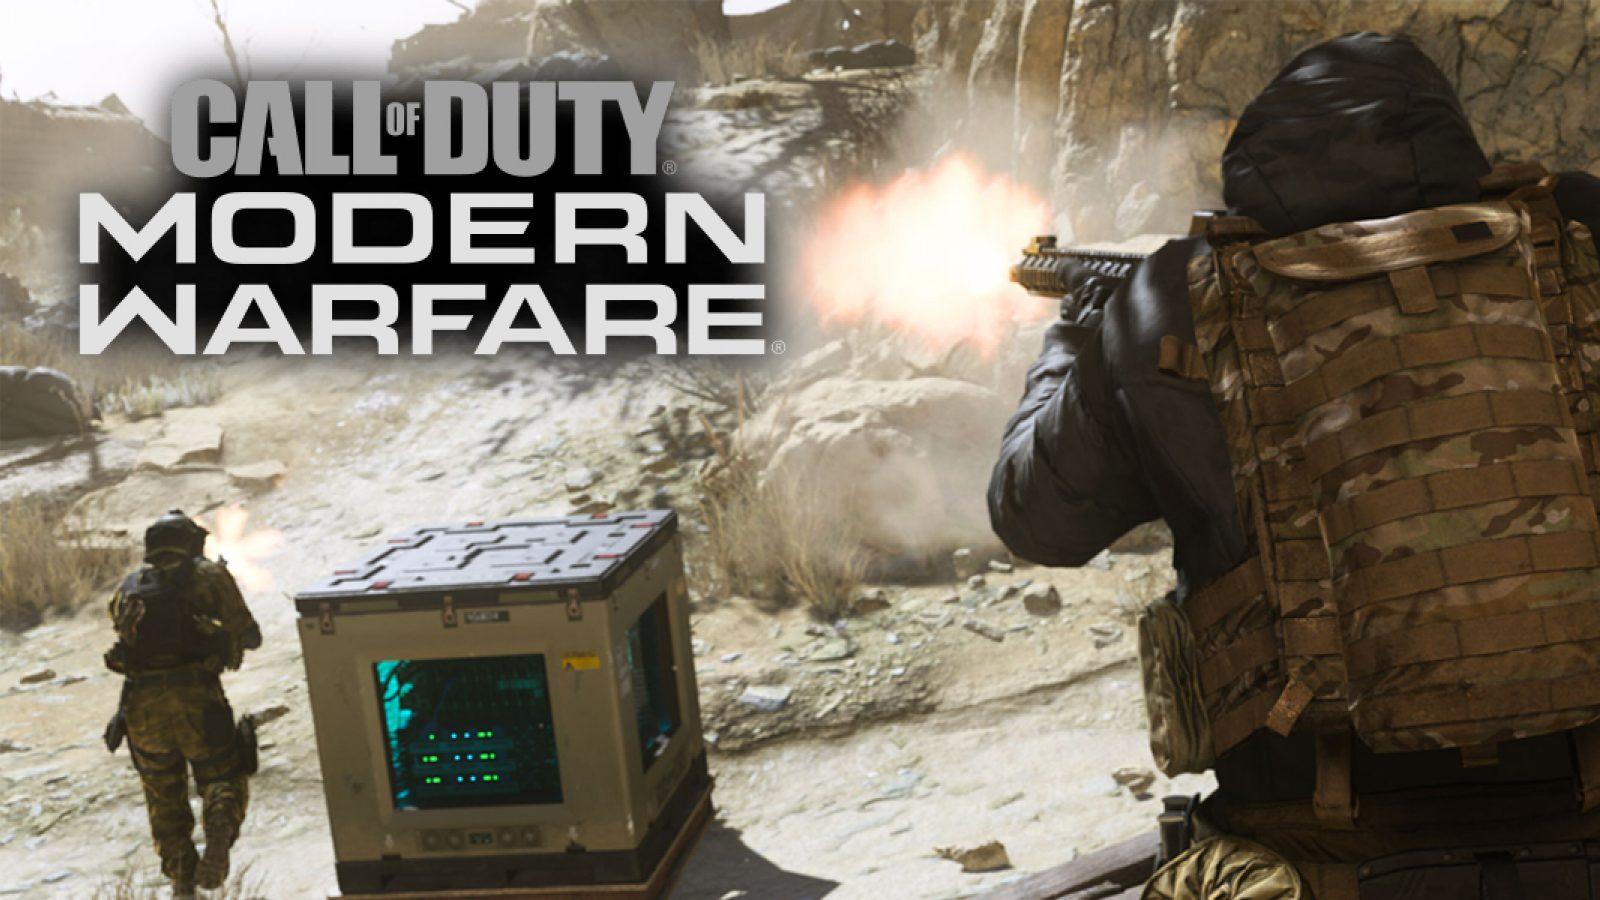 CoD MW2 PC requirements, Minimum & recommended specs for Call of Duty